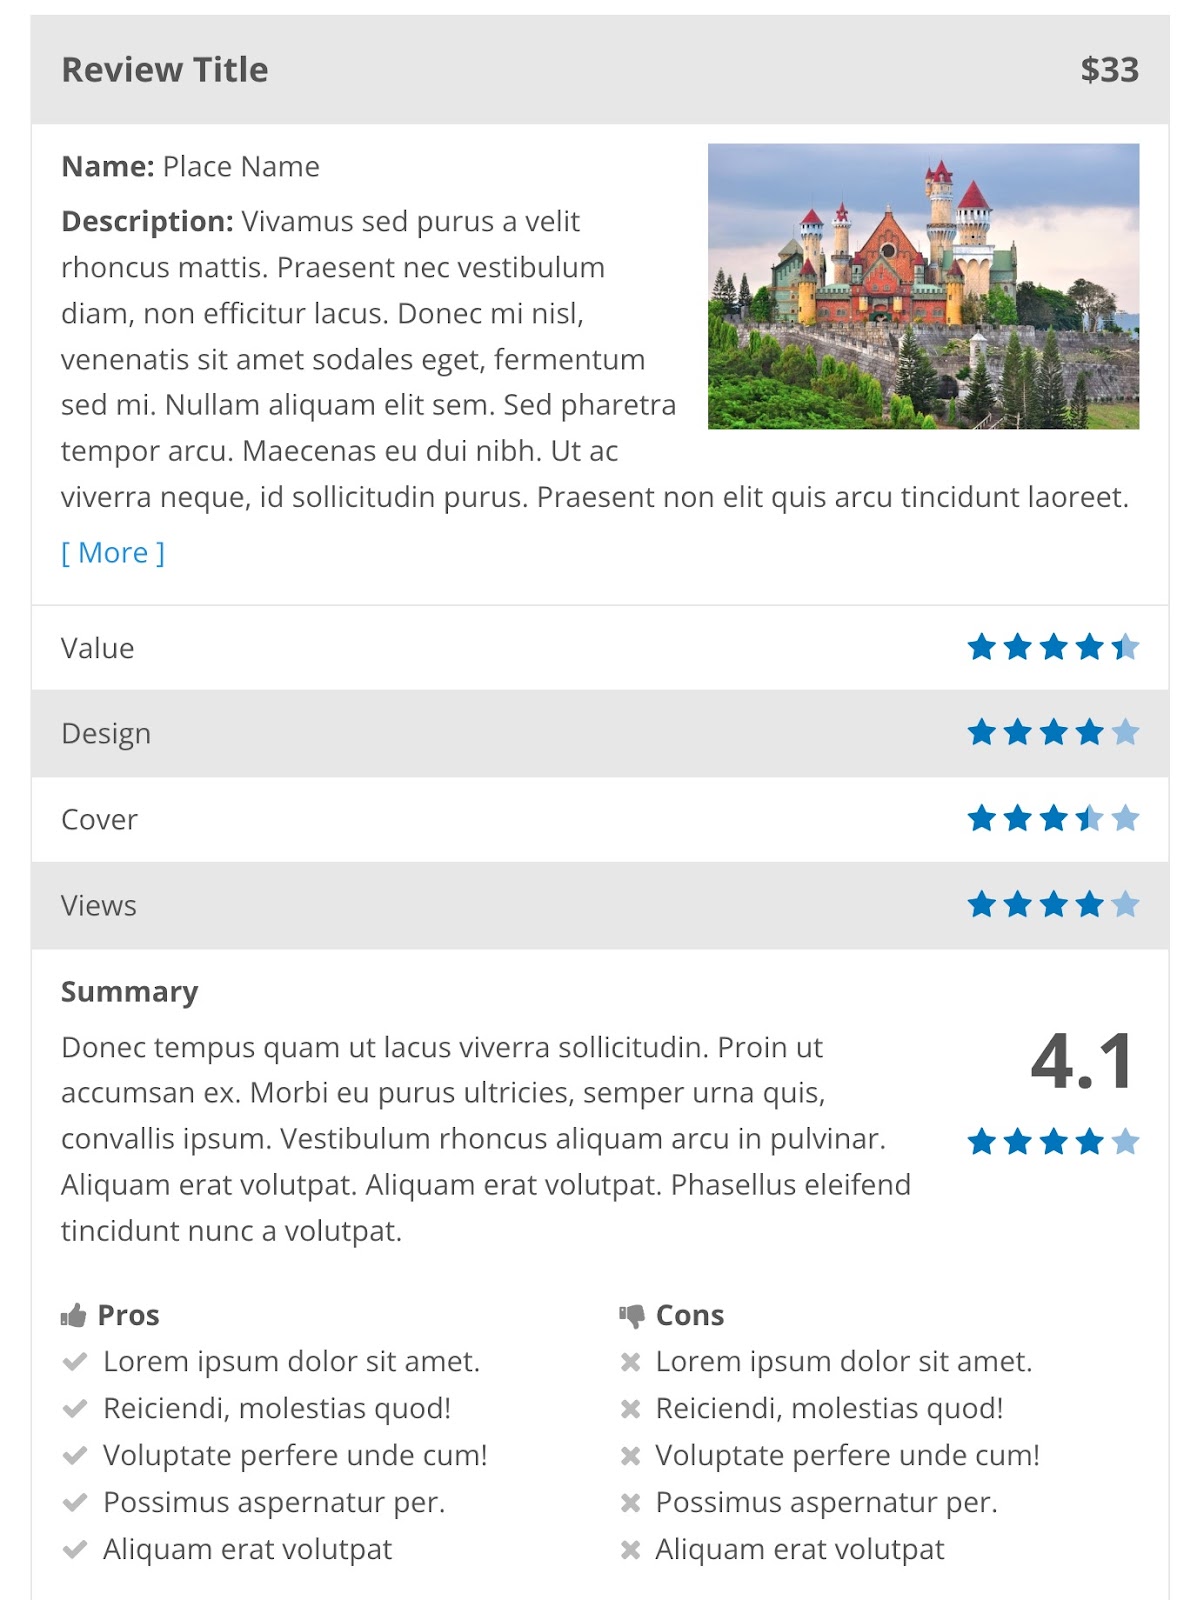 An example of a review summary box from WordPress review plugins